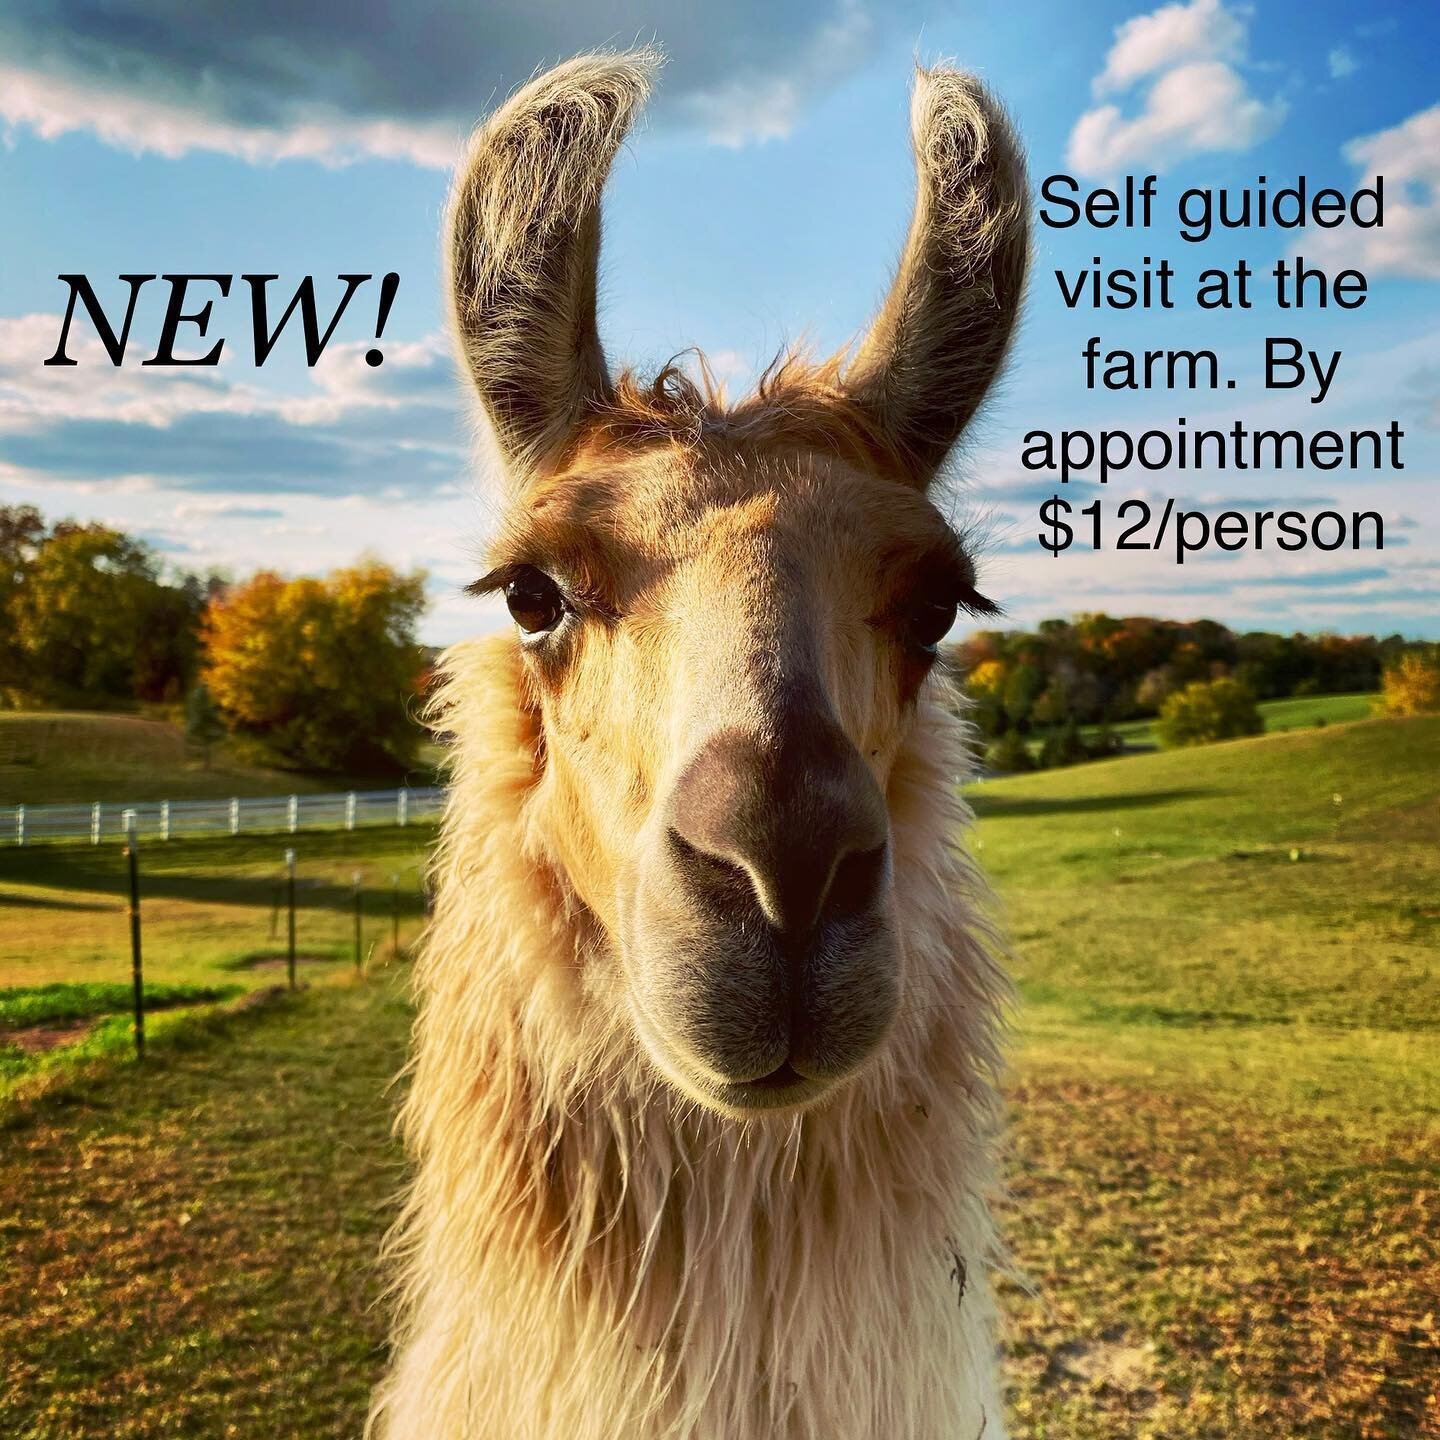 ADDITIONAL offering at the farm! Feed, snuggle &amp; spend time with our animals on a self guided tour. 
🦙 🐐 🐓 🦚 

We also still offer the full guided experience, birthday parties &amp; custom events as well!
🎉🎈

Our llamas, goats, chickens &am